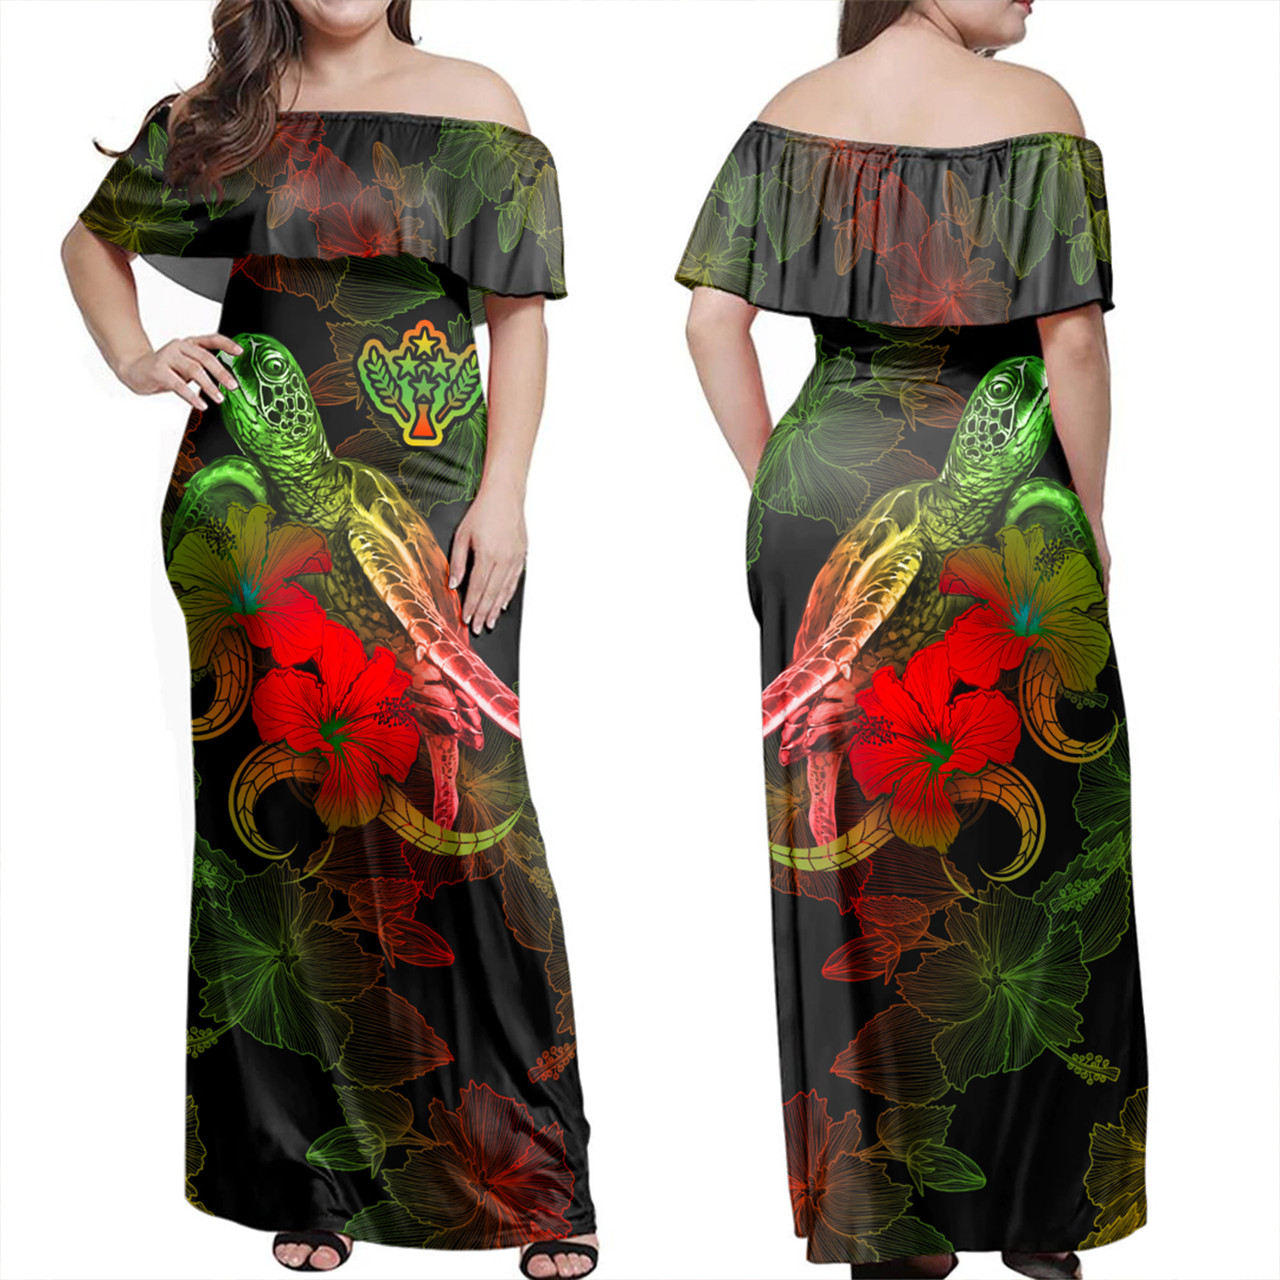 Kosrae Combo Dress And Shirt - Sea Turtle With Blooming Hibiscus Flowers Reggae